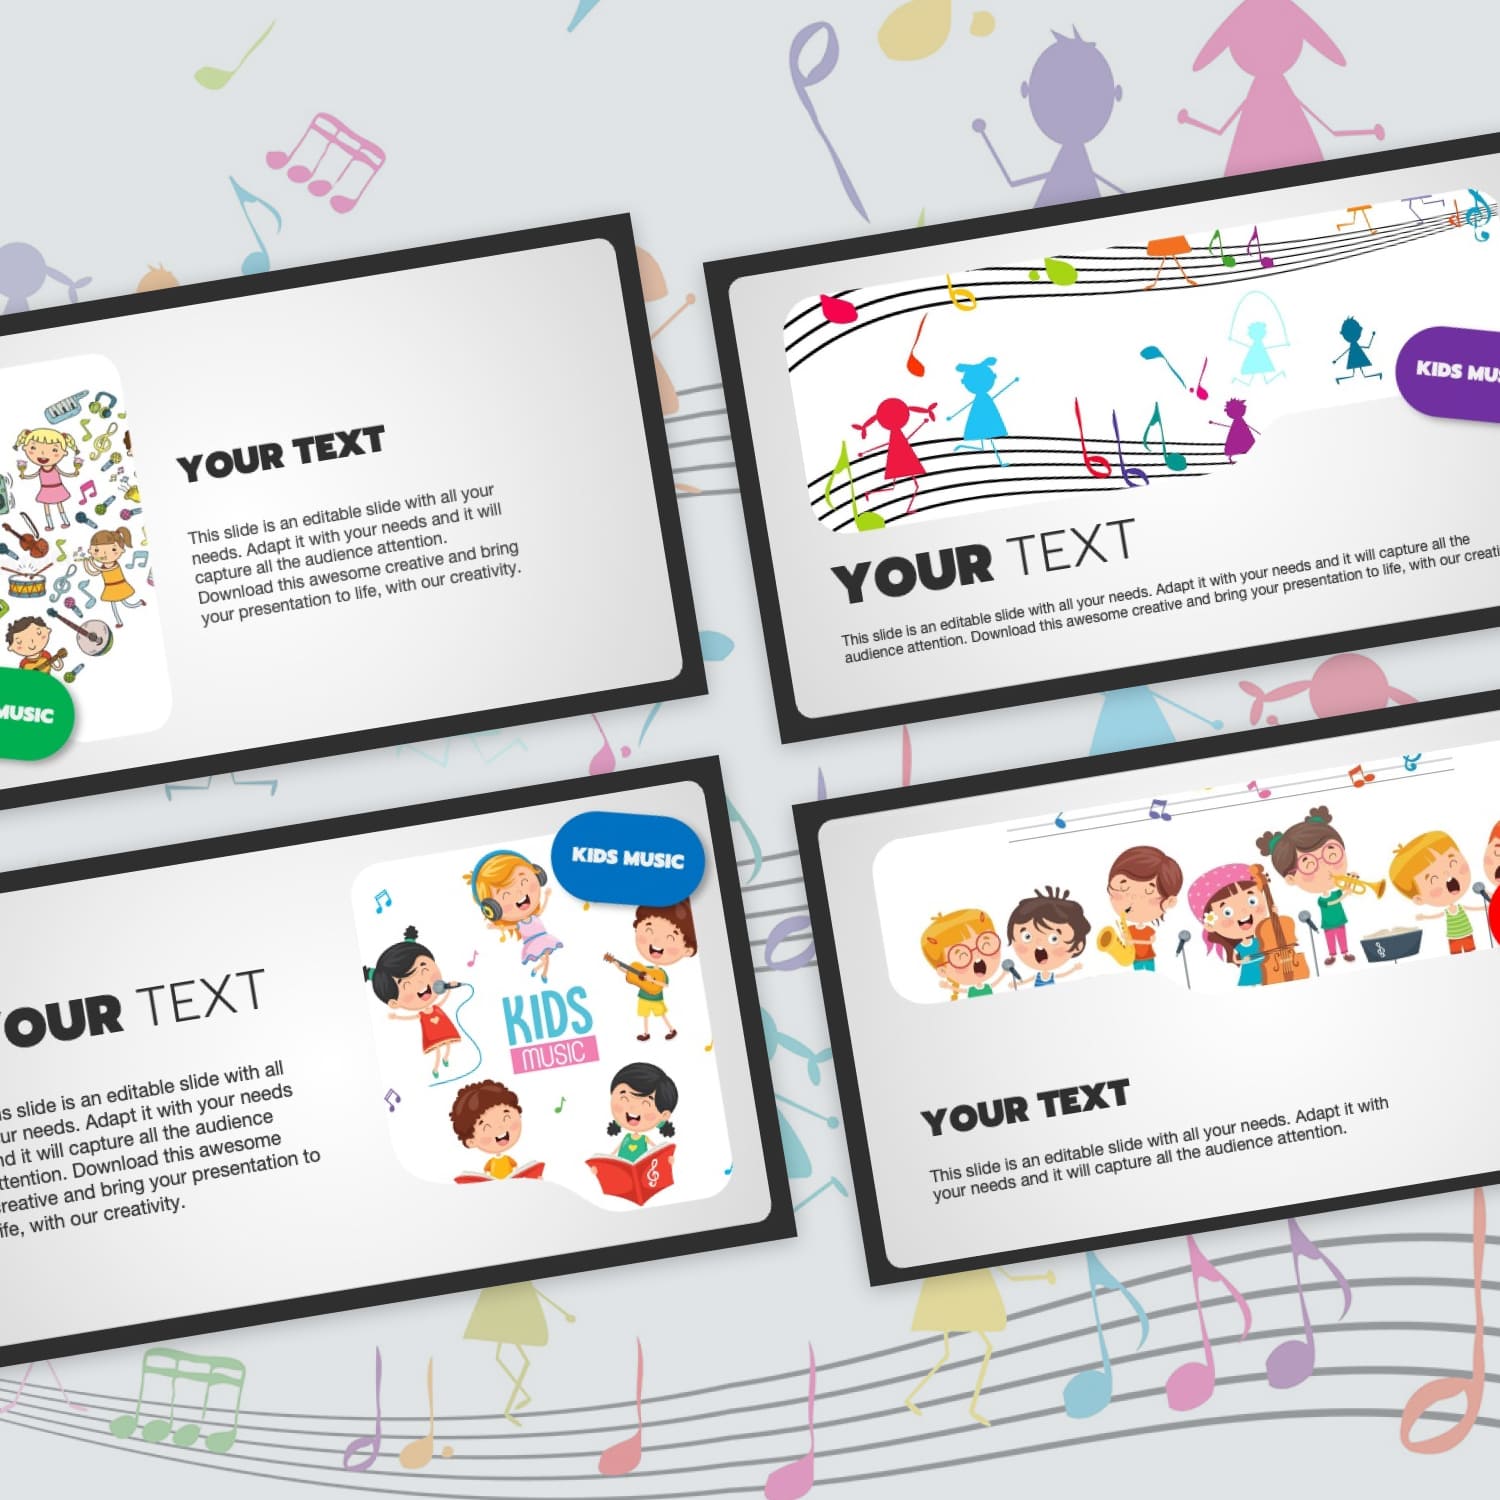 Fun Powerpoint Backgrounds For Kids Music cover image.